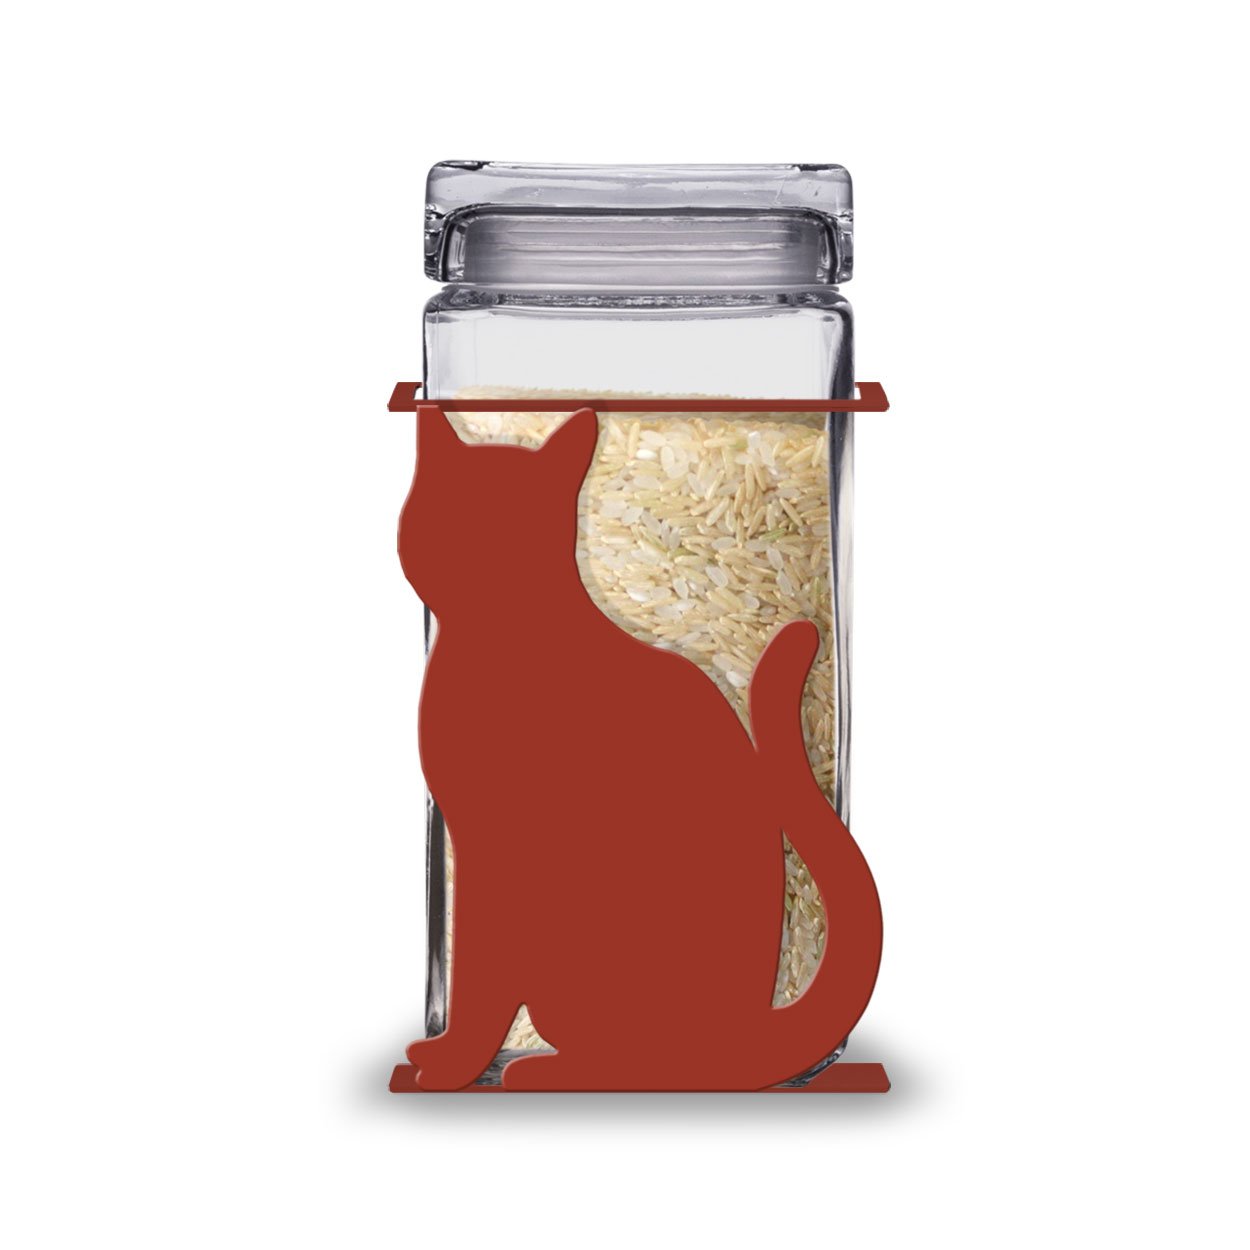 620013 - Sitting Cat 2-Quart Glass and Metal Canister - Choose Color